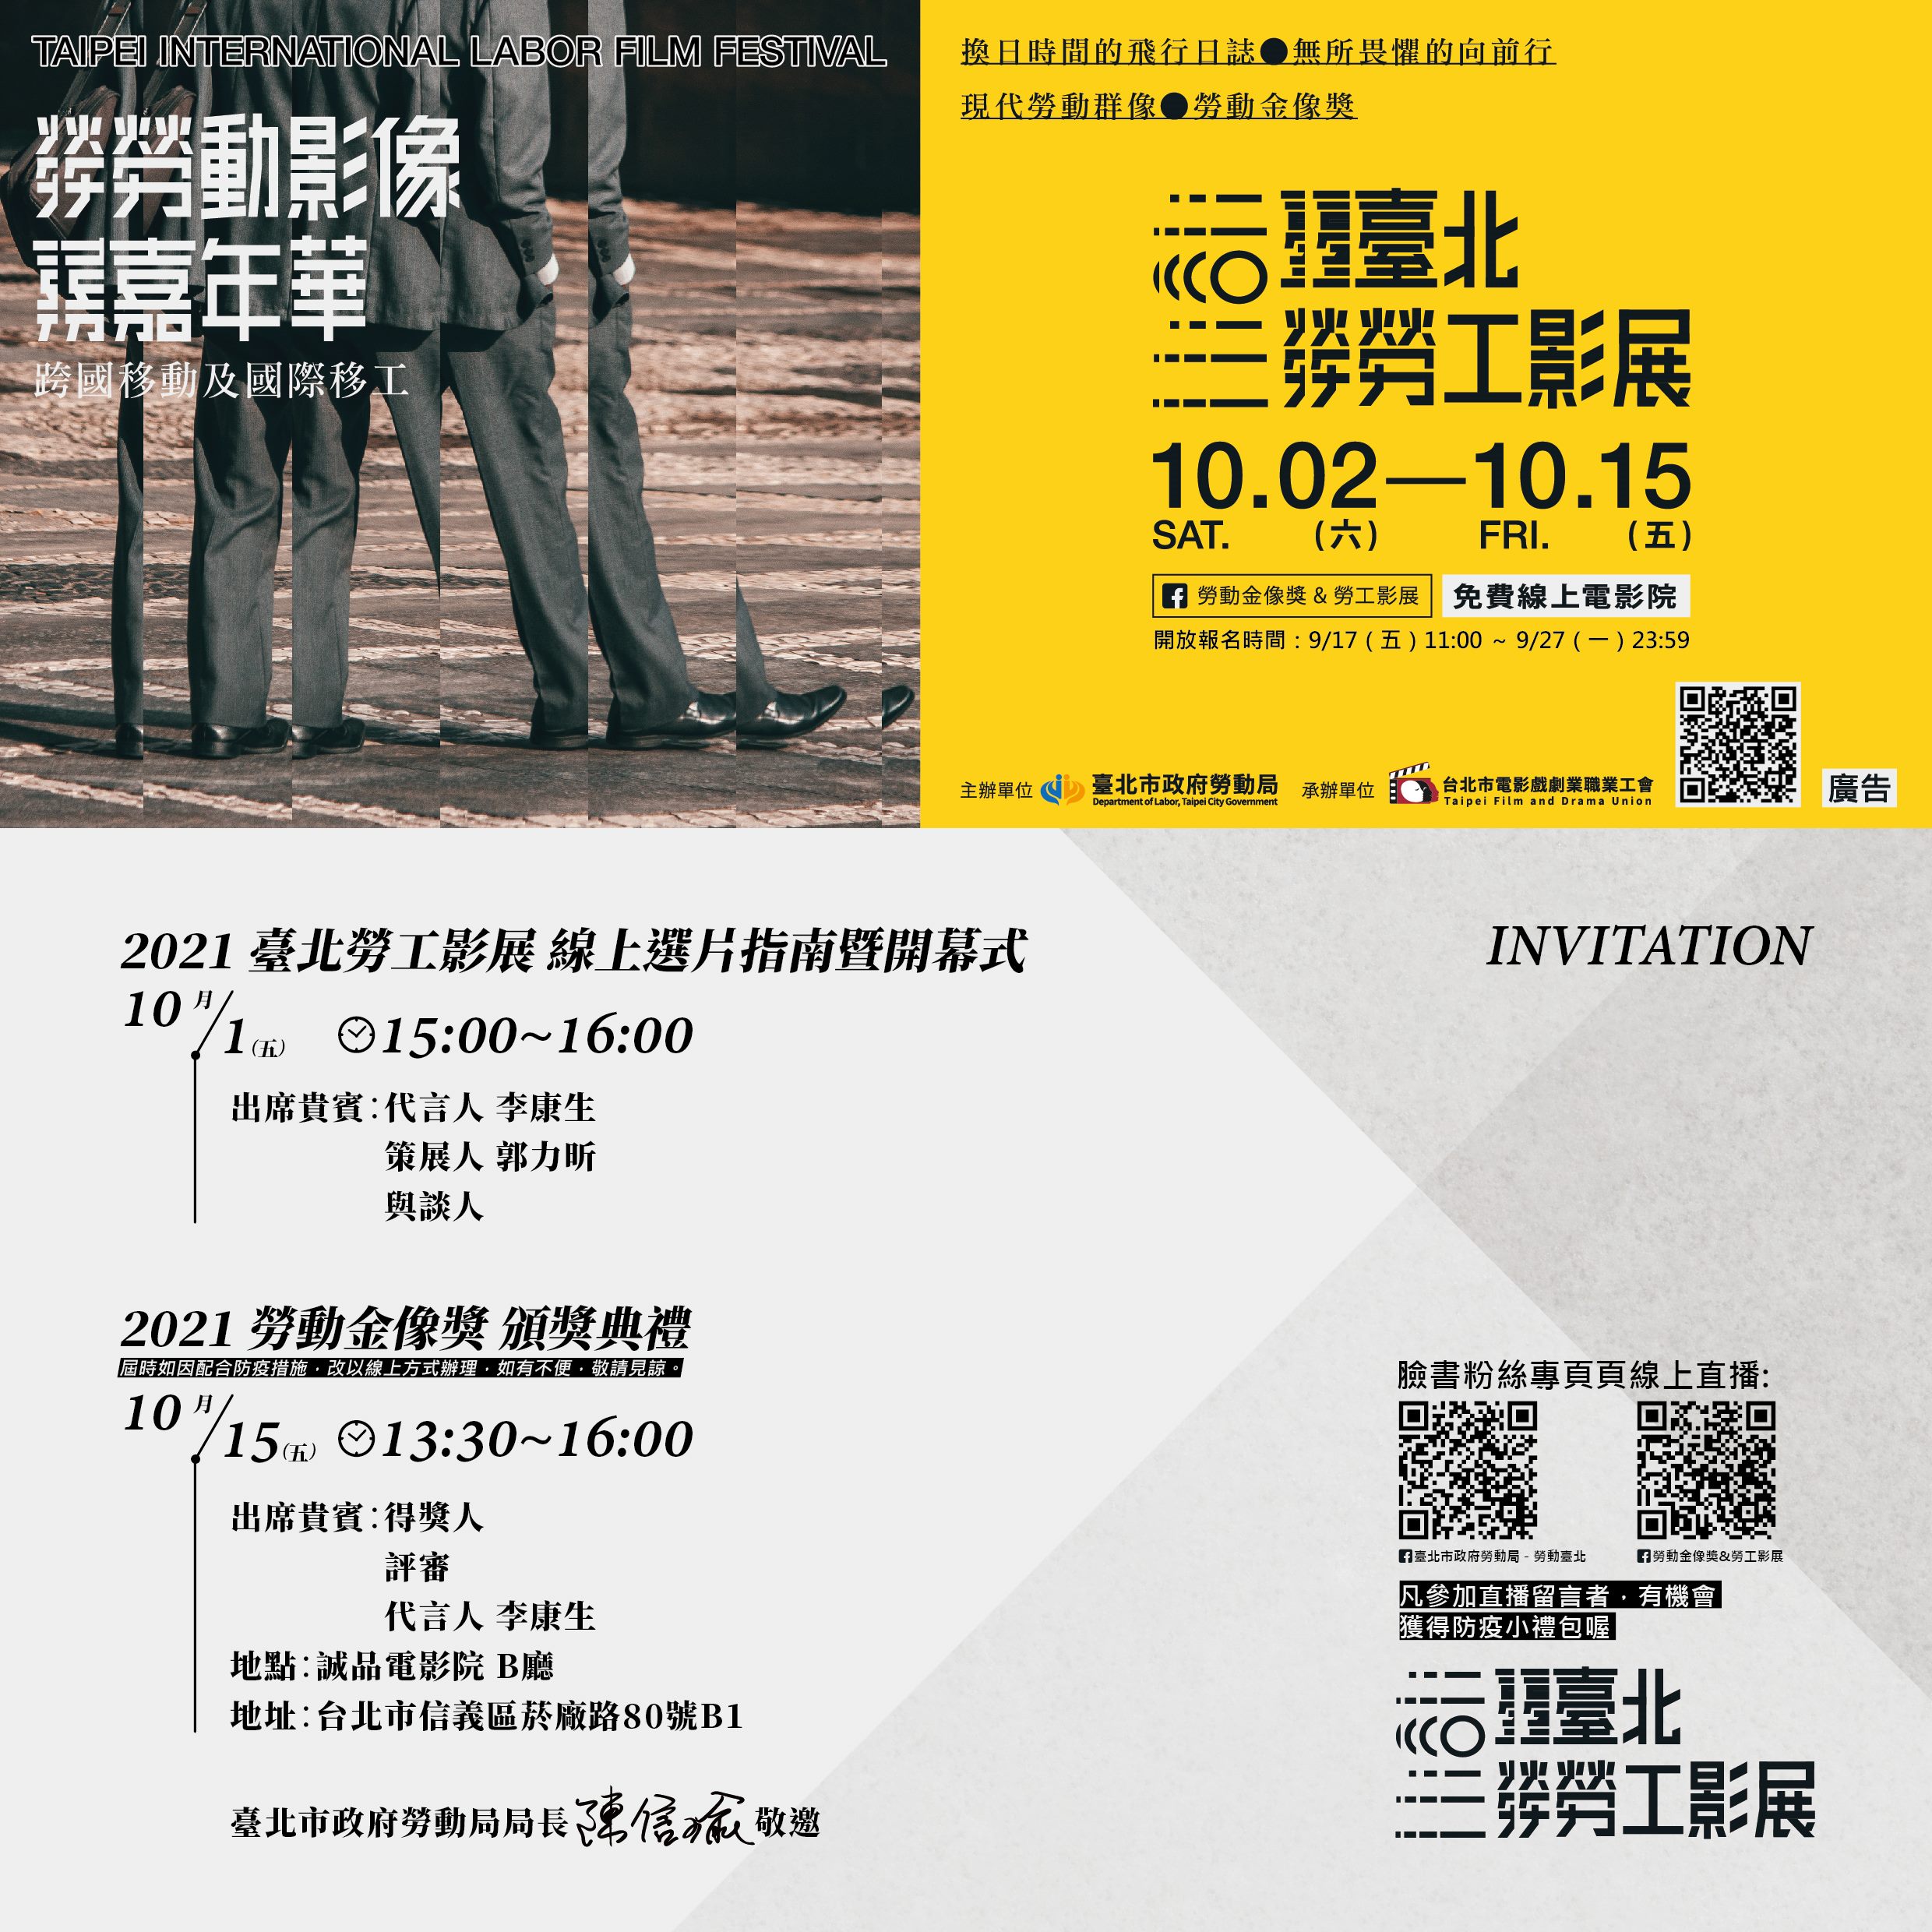 The film festival features "transnational migrant workers", struggles in a foreign land. Photo/Provided by the Taipei City Department of Labor